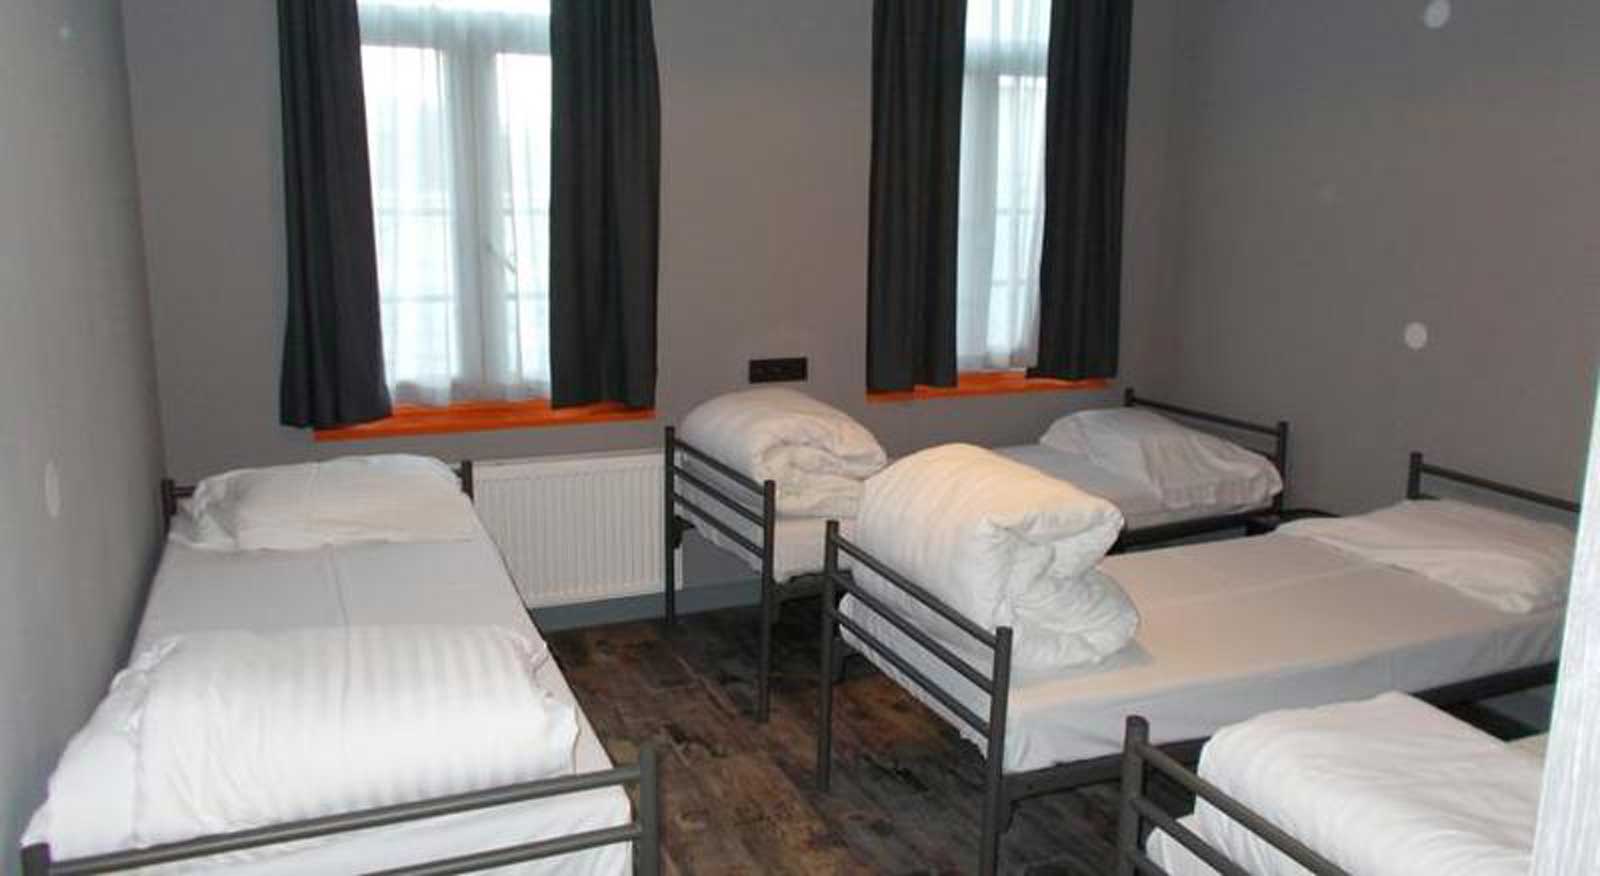 best Dorm rooms in brussels the Urban City Centre Hostel in Brussels